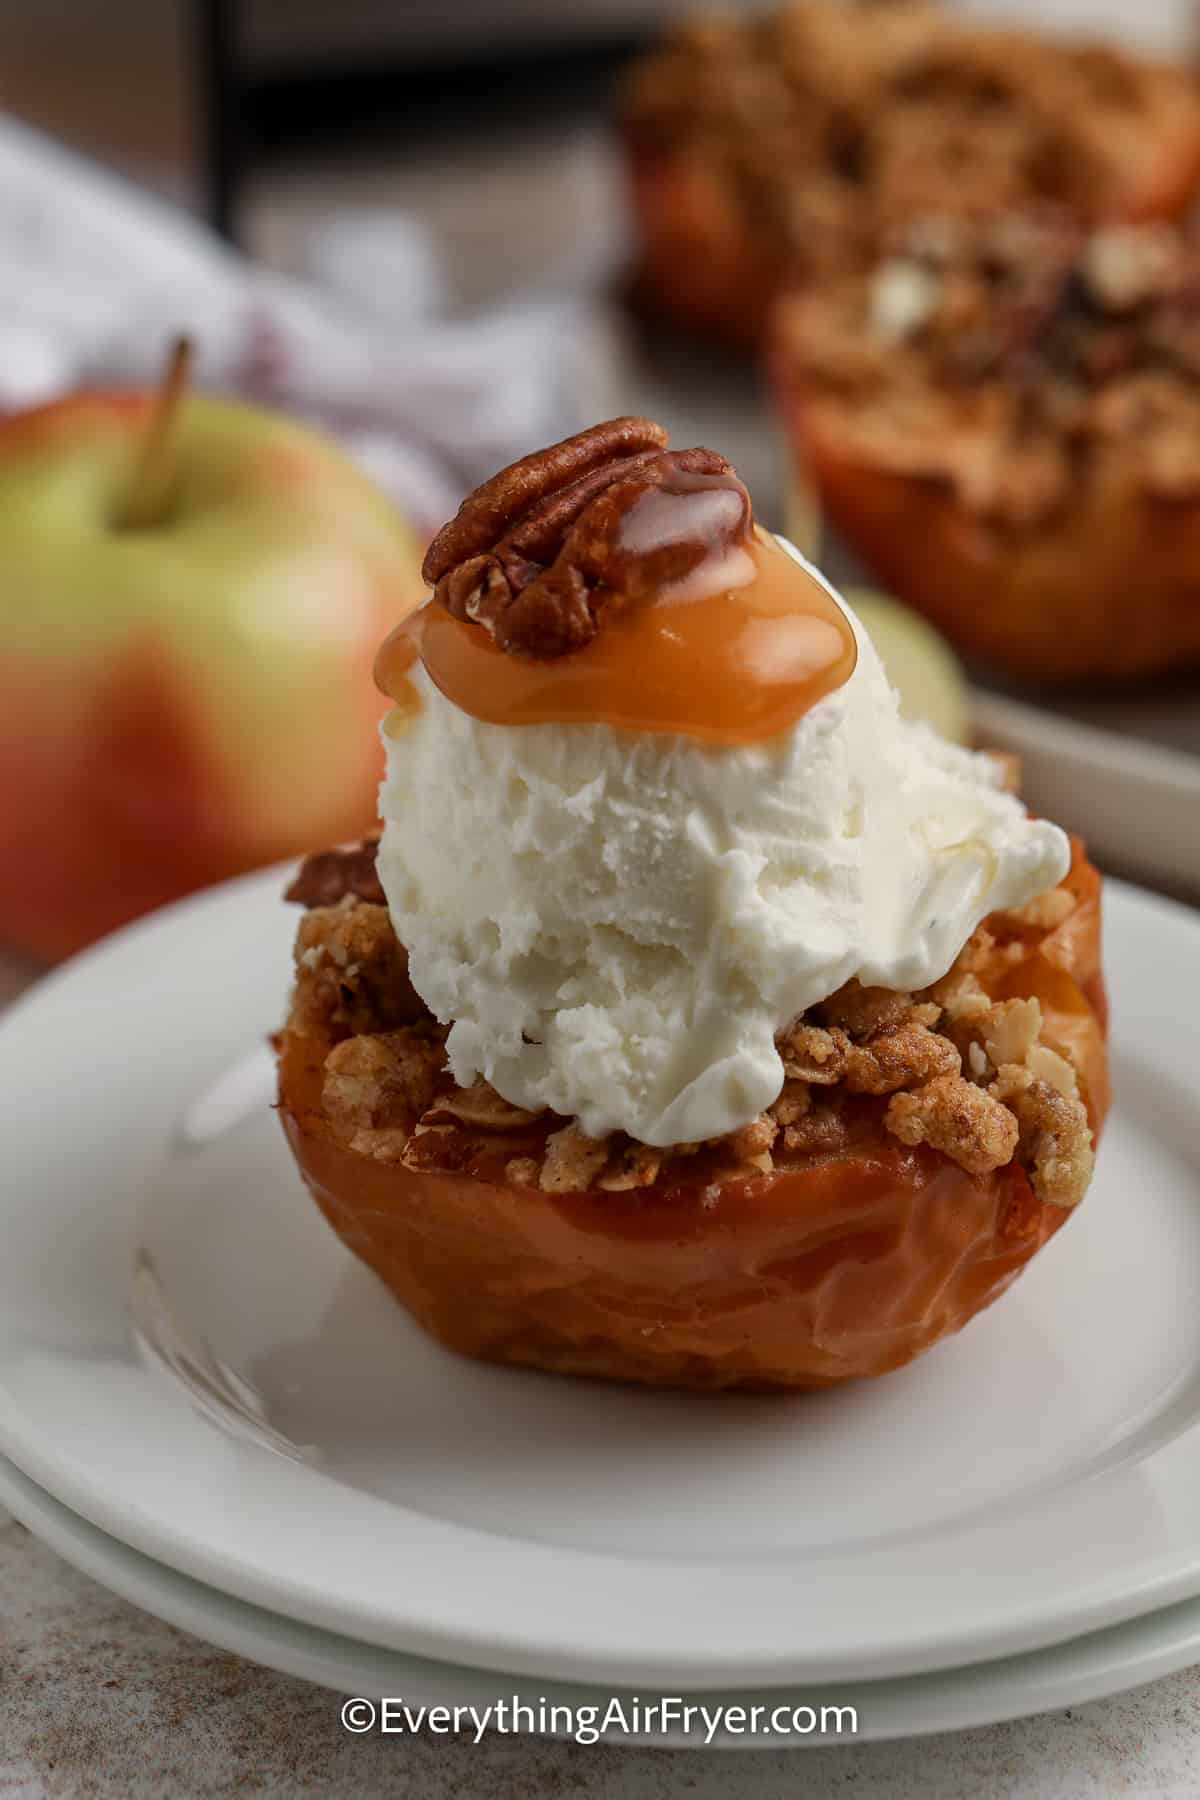 baked apple topped with ice cream and caramel